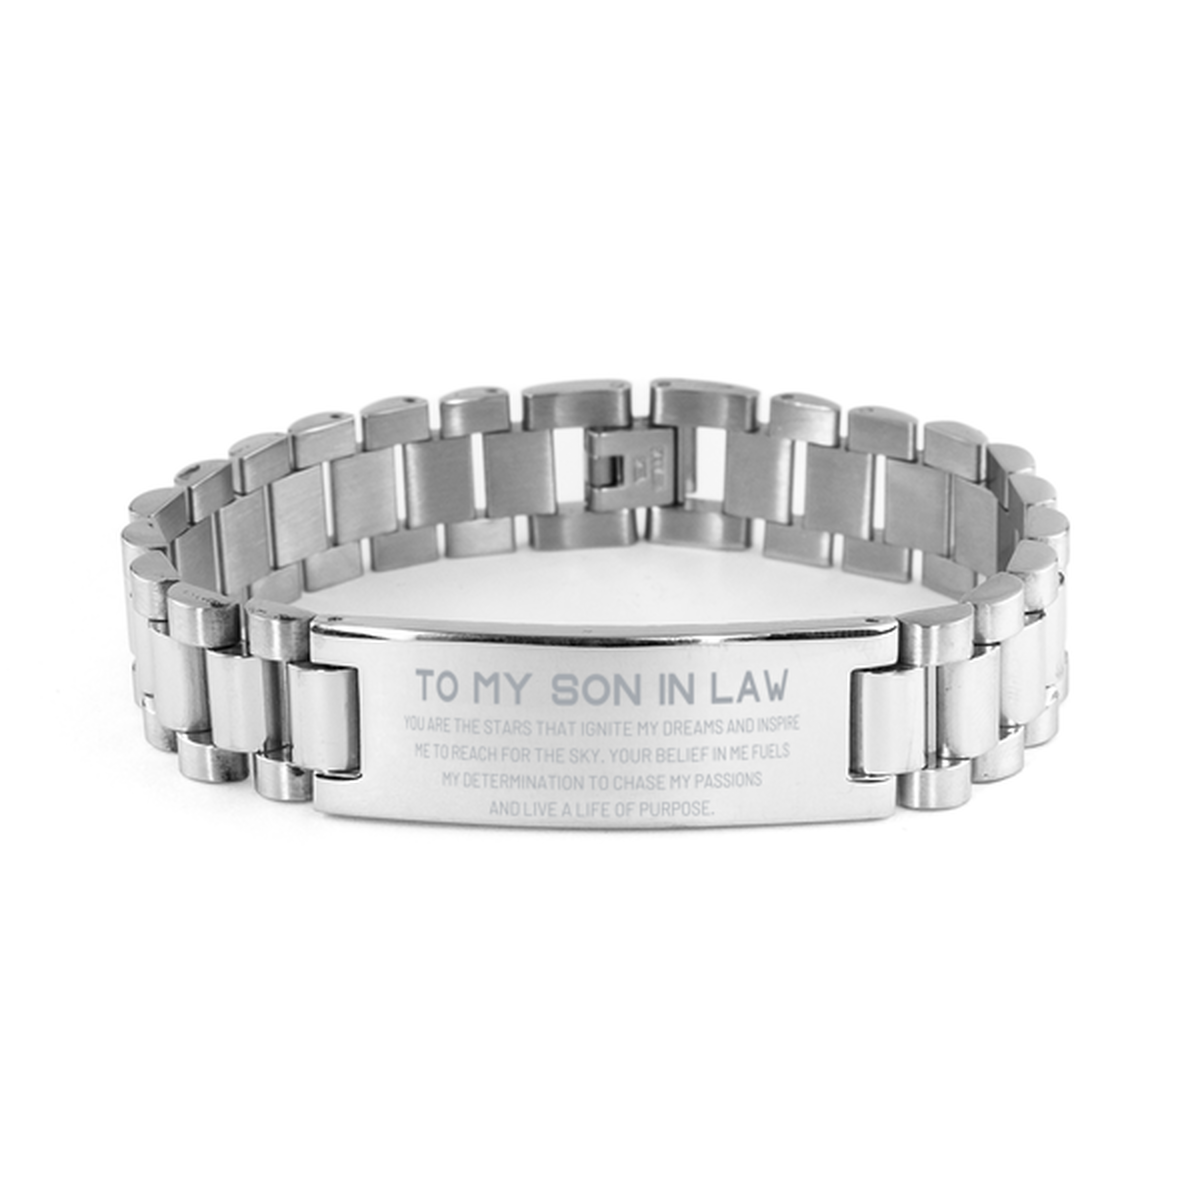 To My Son In Law Ladder Stainless Steel Bracelet, You are the stars that ignite my dreams and inspire me to reach for the sky, Birthday Unique Gifts For Son In Law, Thank You Gifts For Son In Law